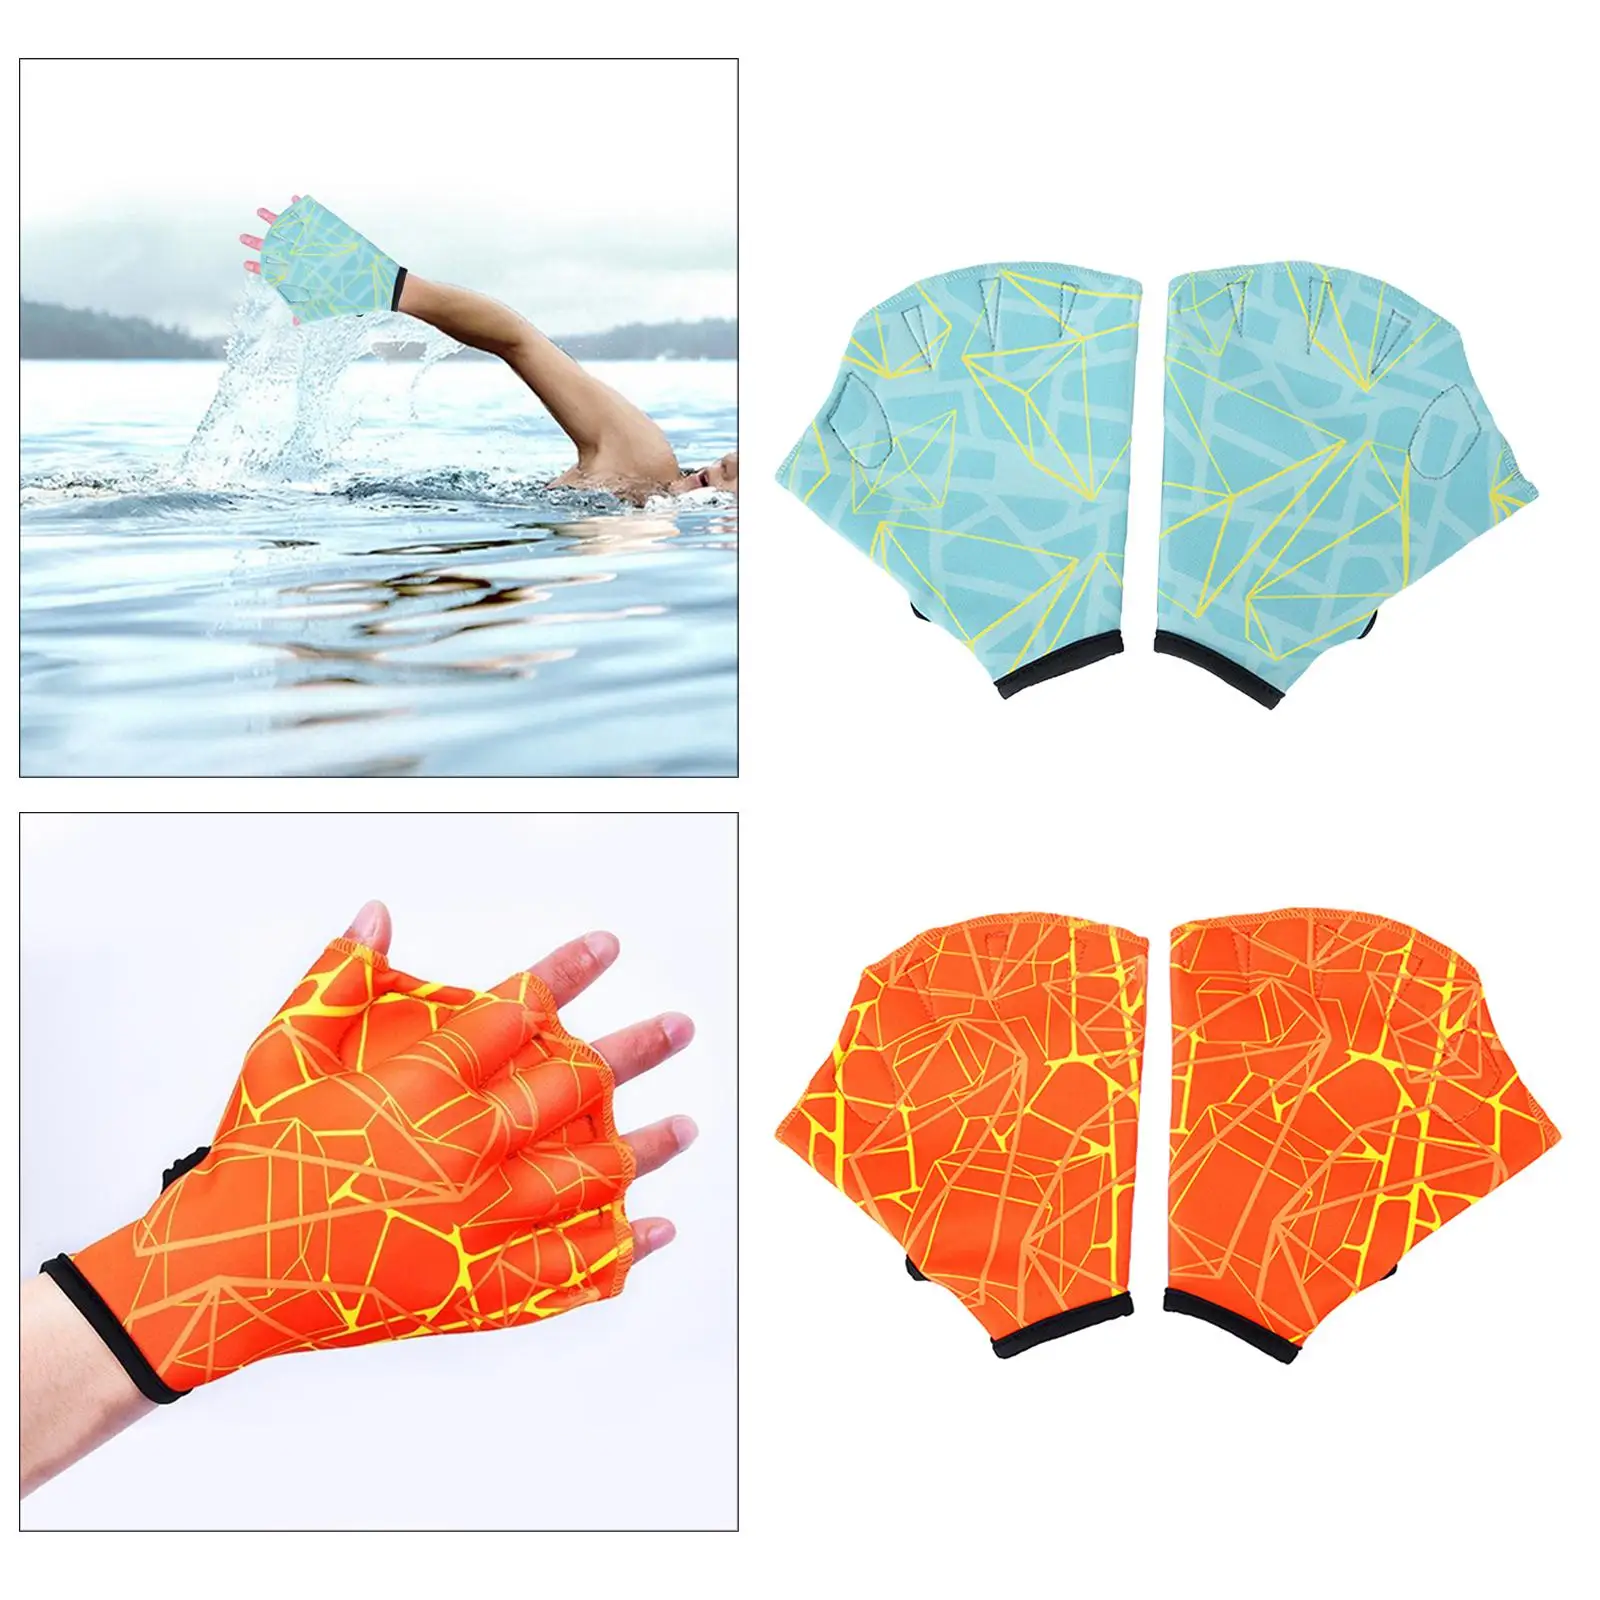 Swimming Webbed Gloves Water Aerobics Surfing Water Resistance Training Gloves with Wrist Strap